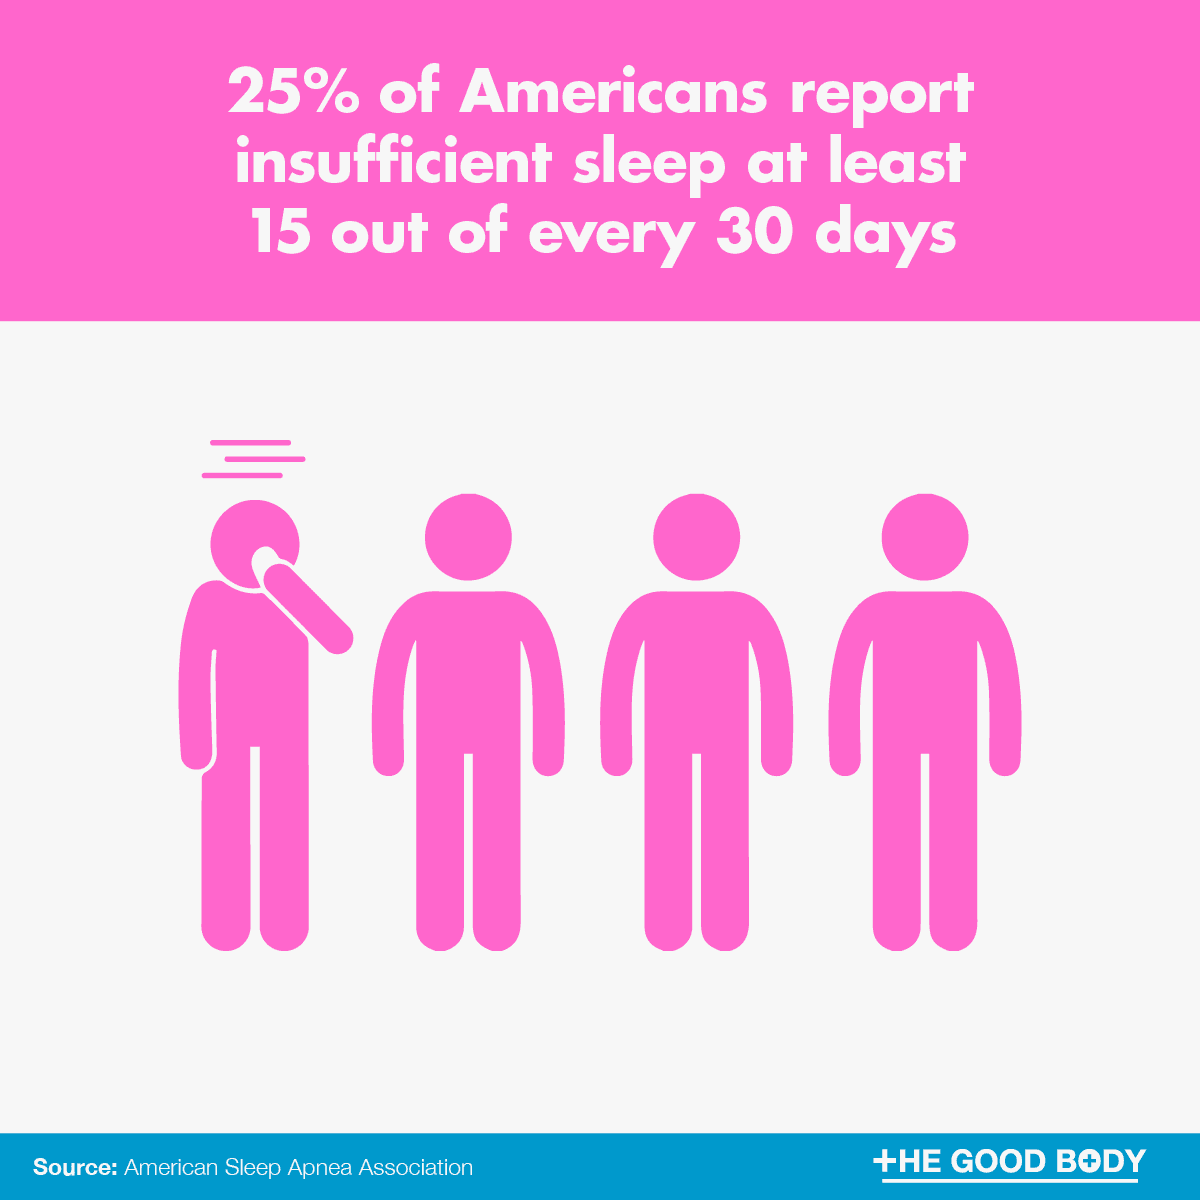 Infographic: 25% of Americans report insufficient sleep at least 15 out of every 30 days